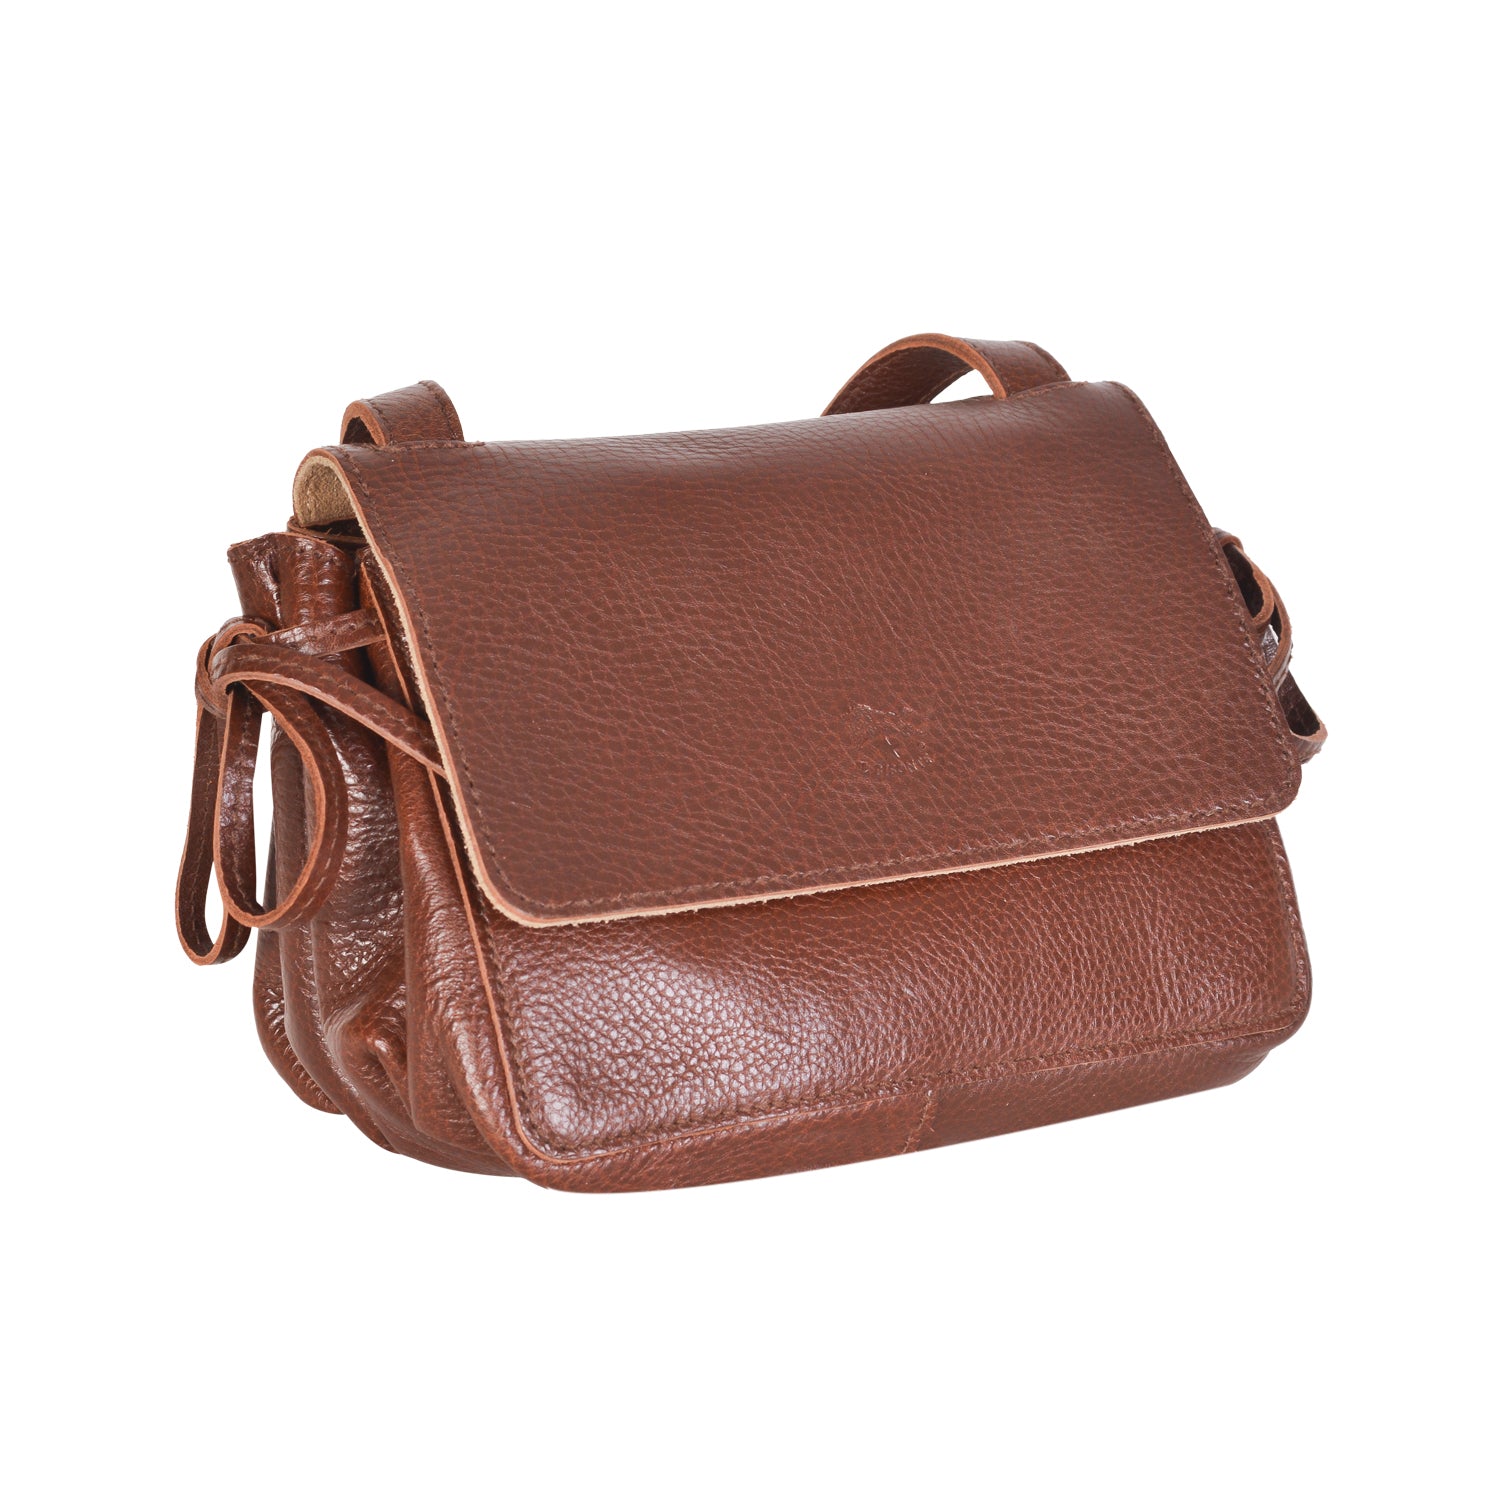 NEW IL BISONTE WOMEN'S SOFFIETTO COLLECTION CROSSBODY BAG IN BROWN LEATHER